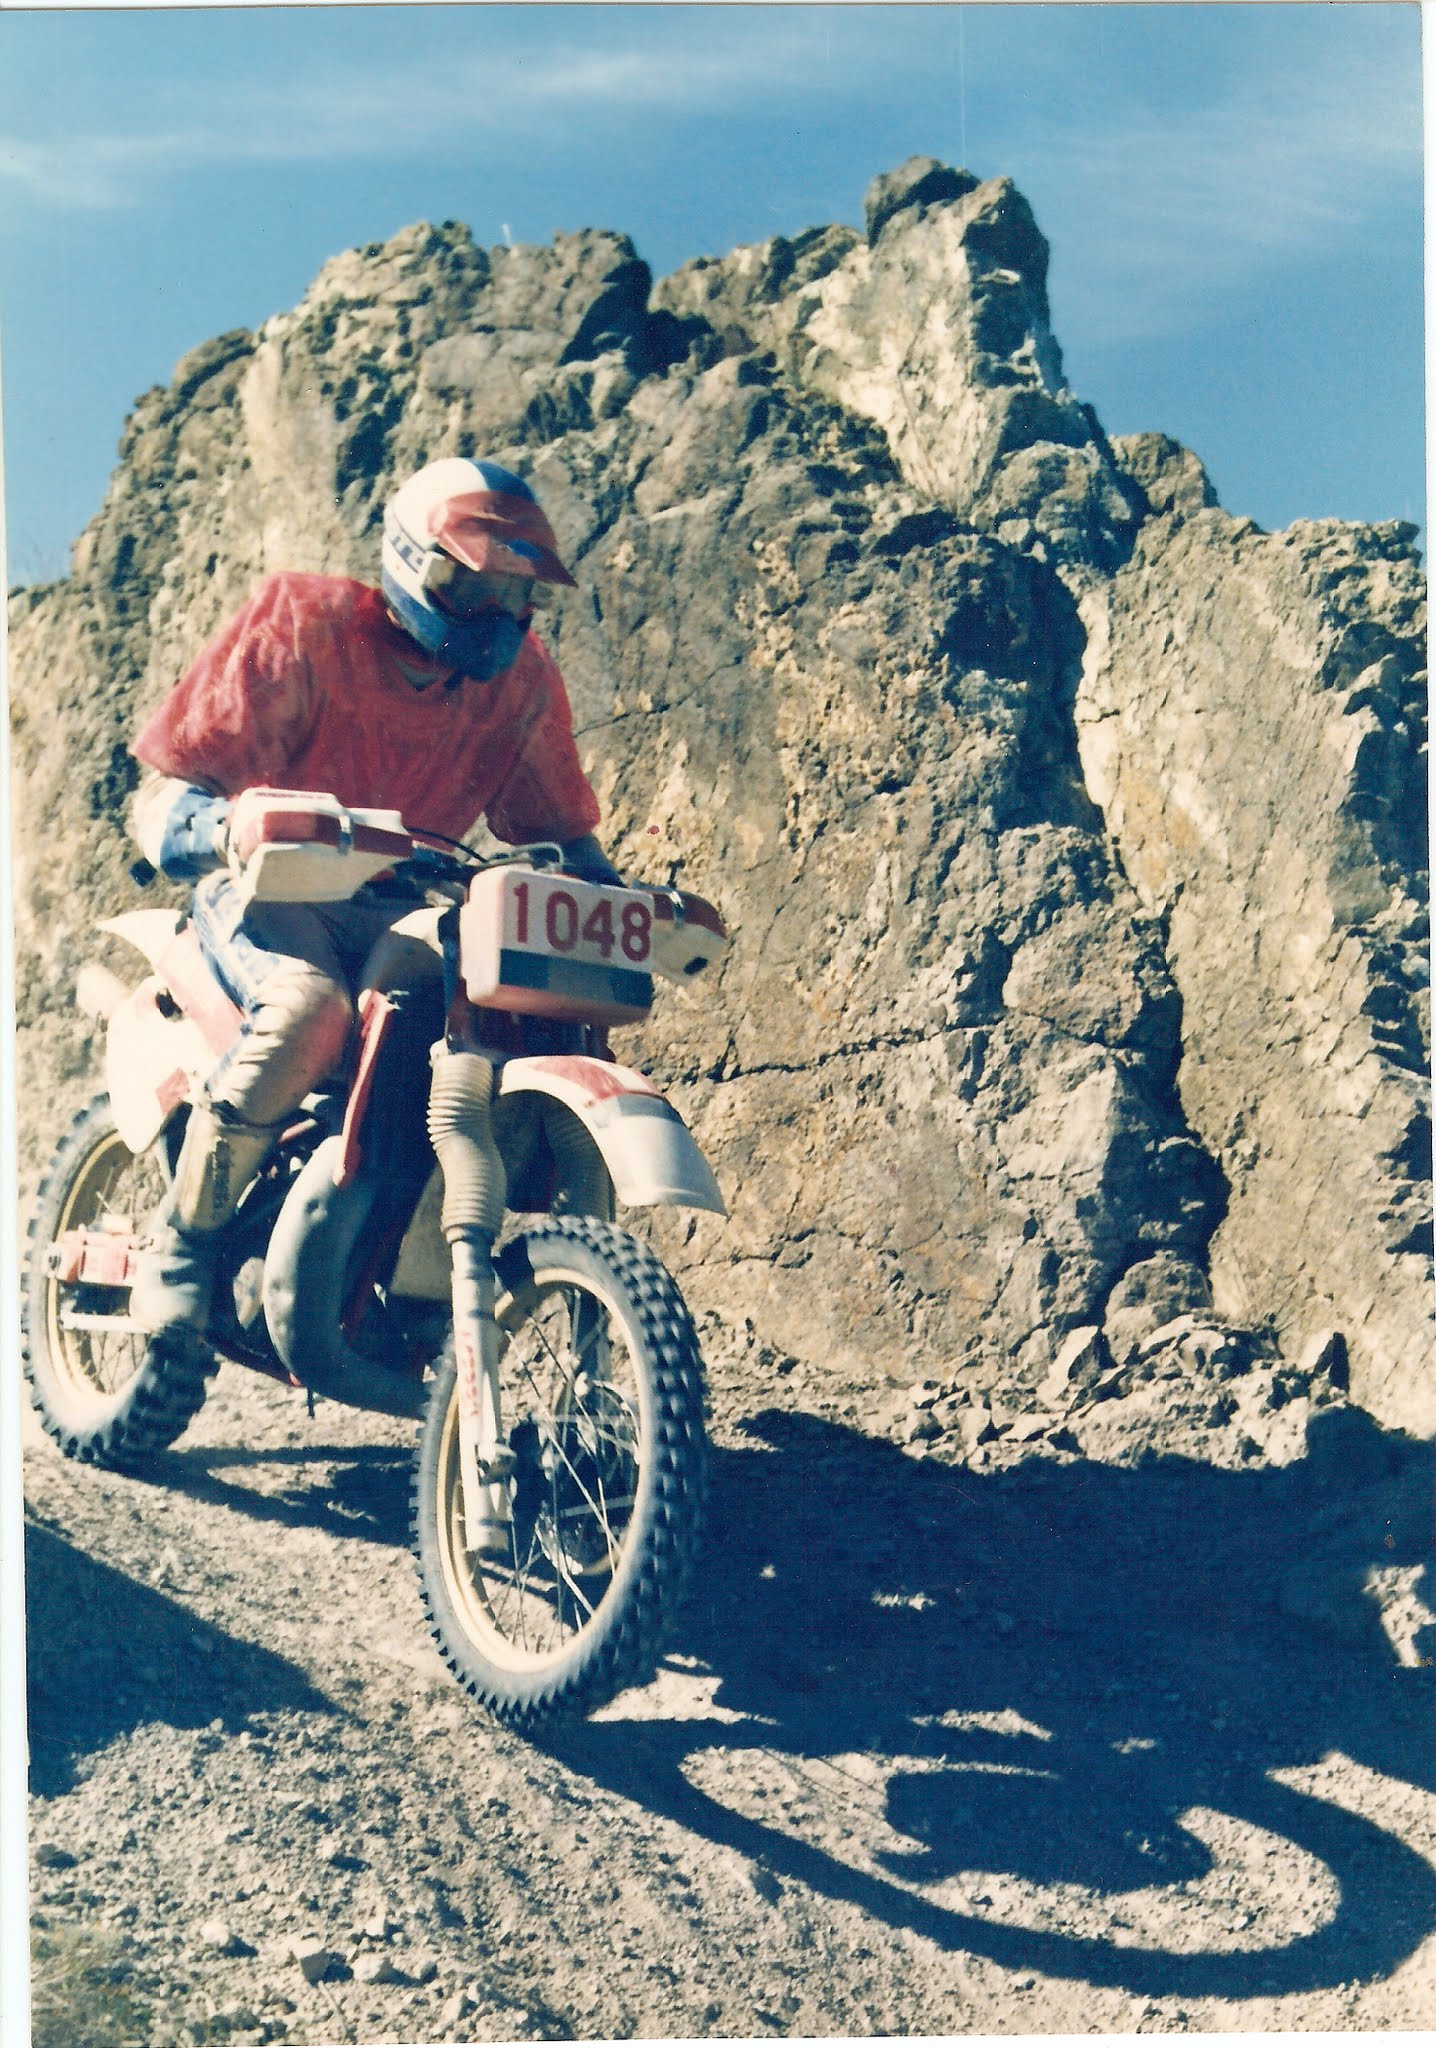 Mike on his YZ 250 close to Vegas in 1989